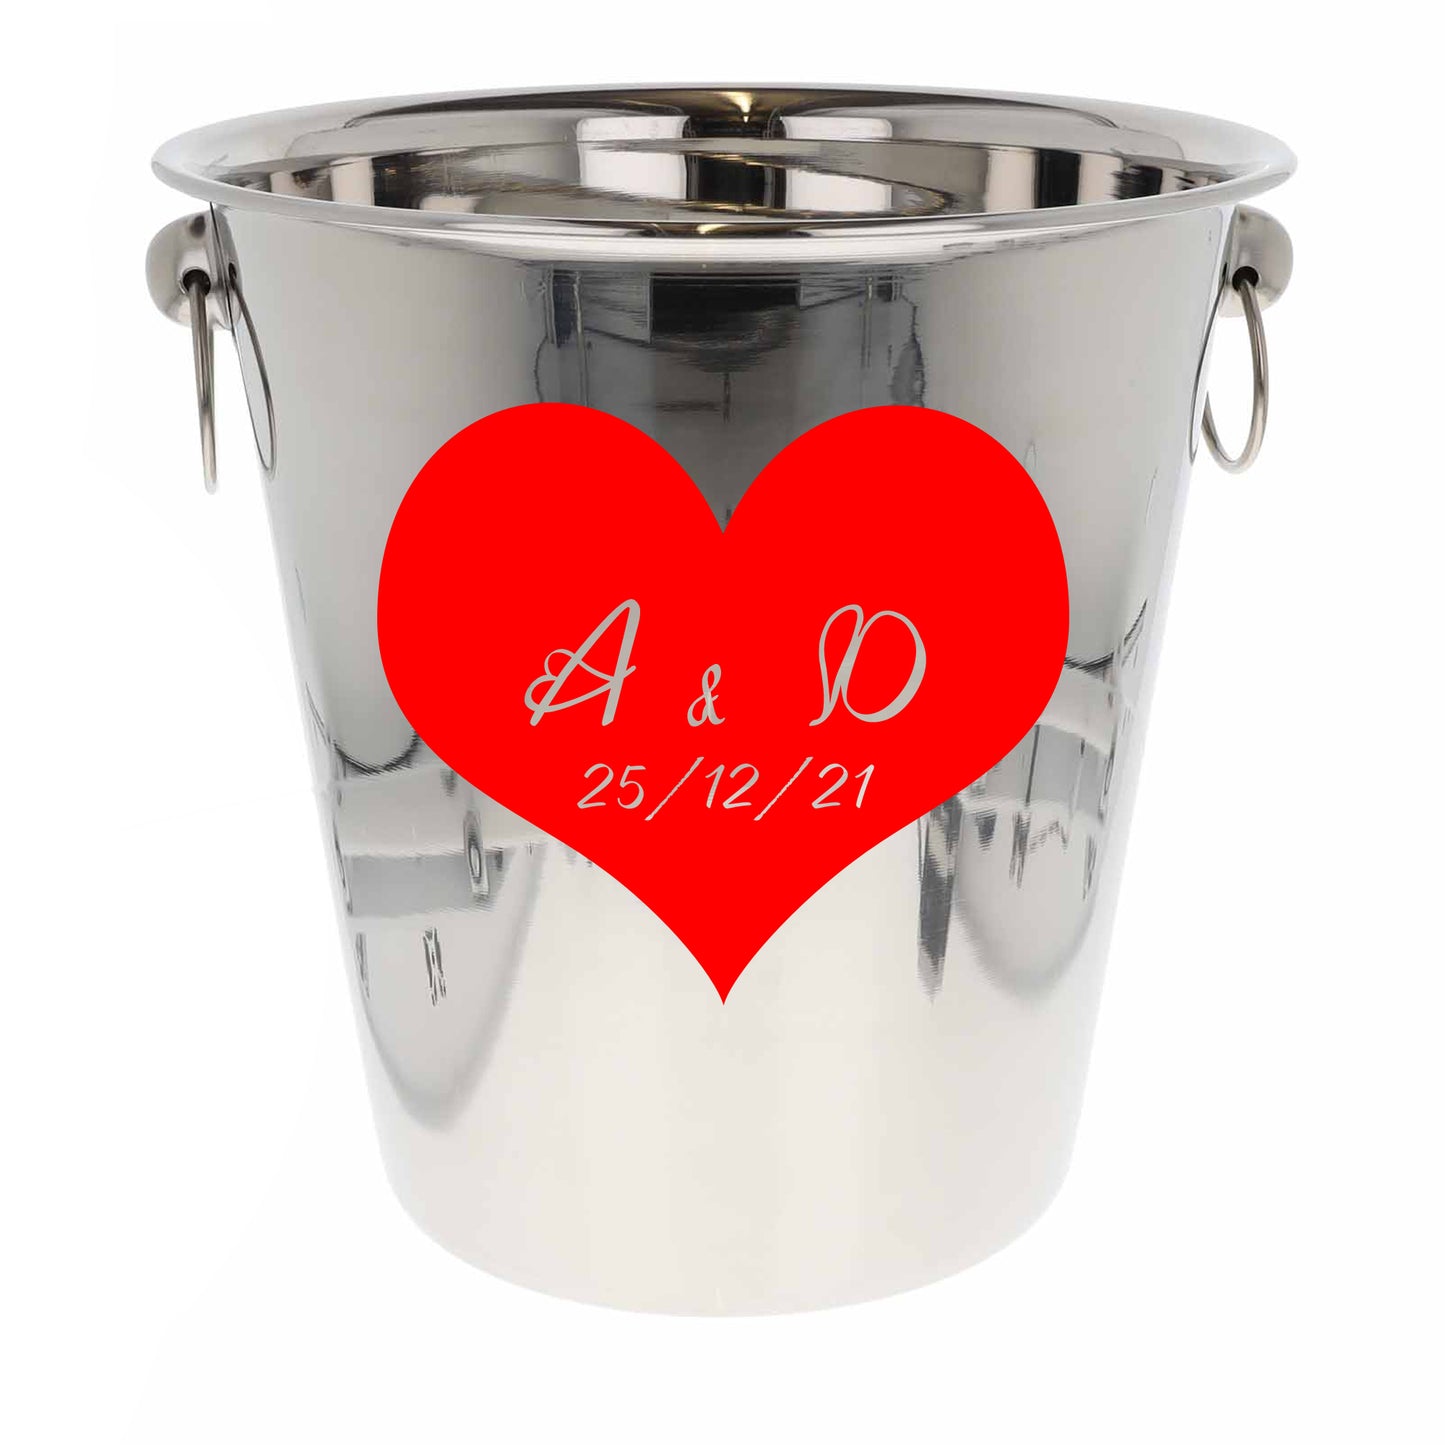 Personalised Heart Design Ice Bucket With Matching Champagne Glasses With Name and Date  - Always Looking Good -   